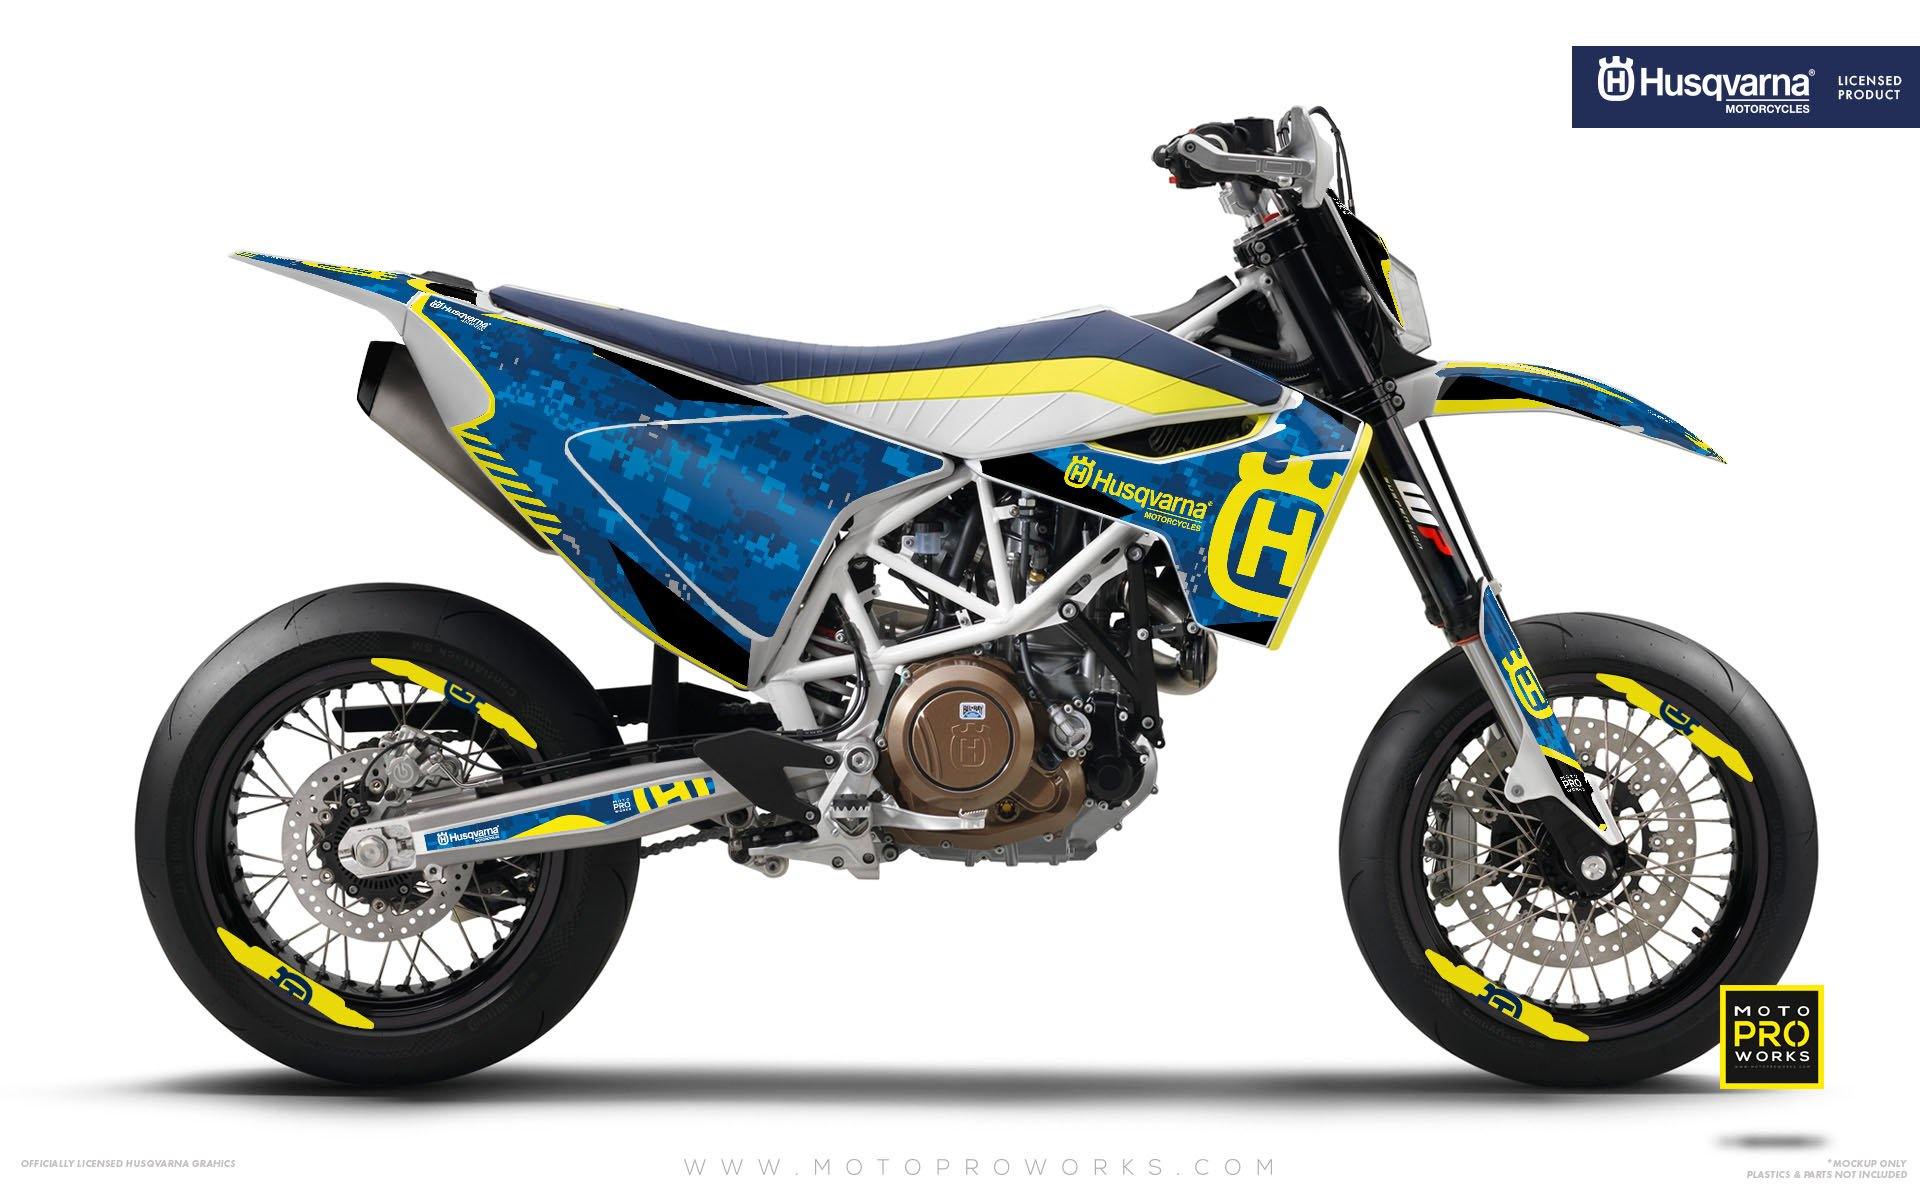 Husqvarna GRAPHIC KIT - "FACTOR" (Marpatcamo/blue) - MotoProWorks | Decals and Bike Graphic kit